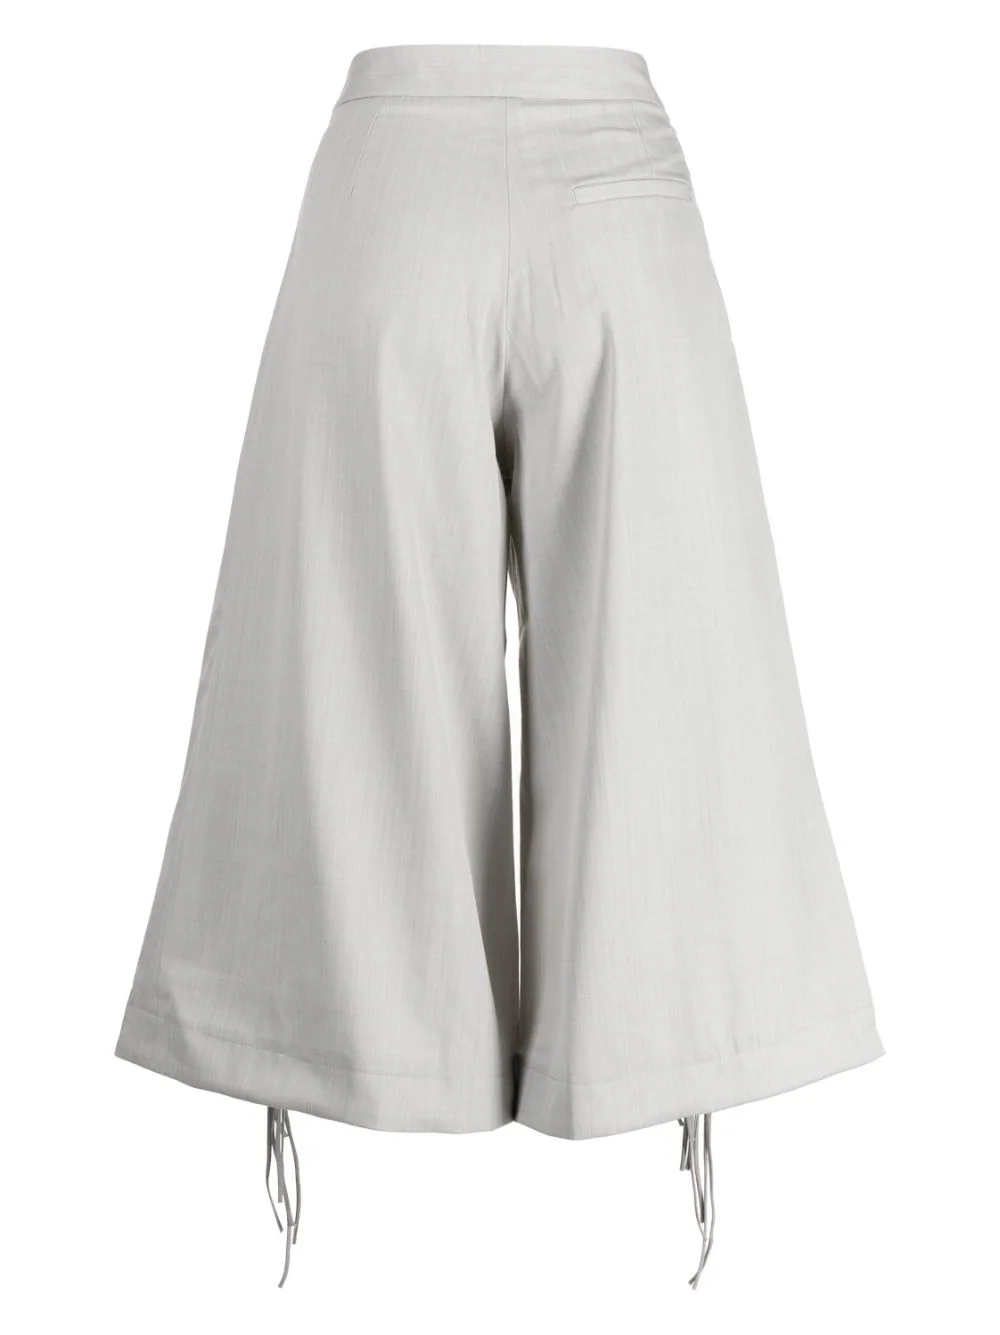 palmer-harding-Connected-Culotte-Light-Grey-2